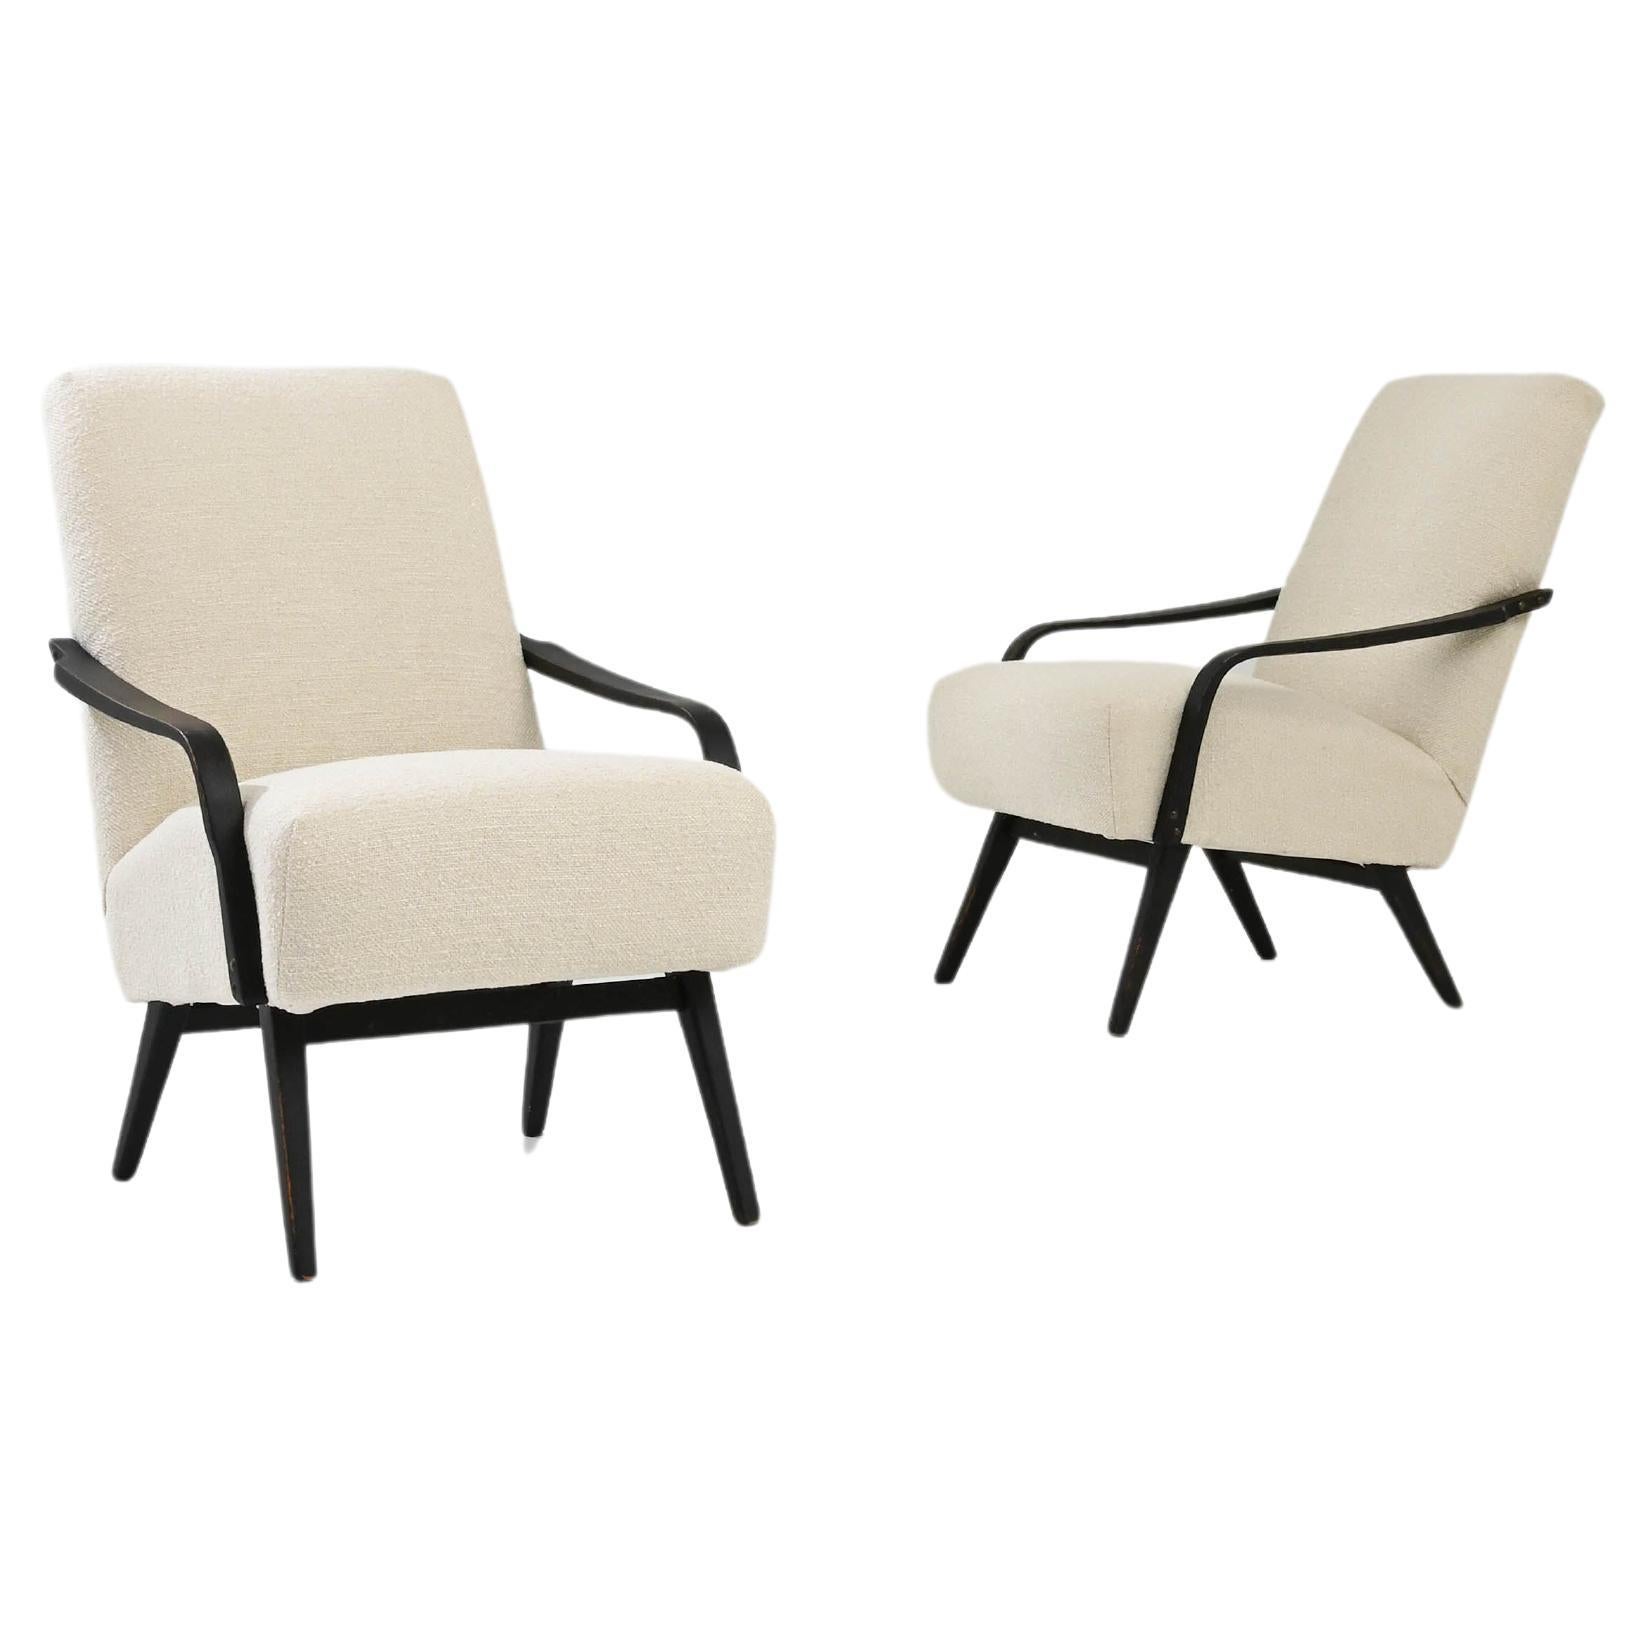 20th Century Armchairs by TON, a Pair